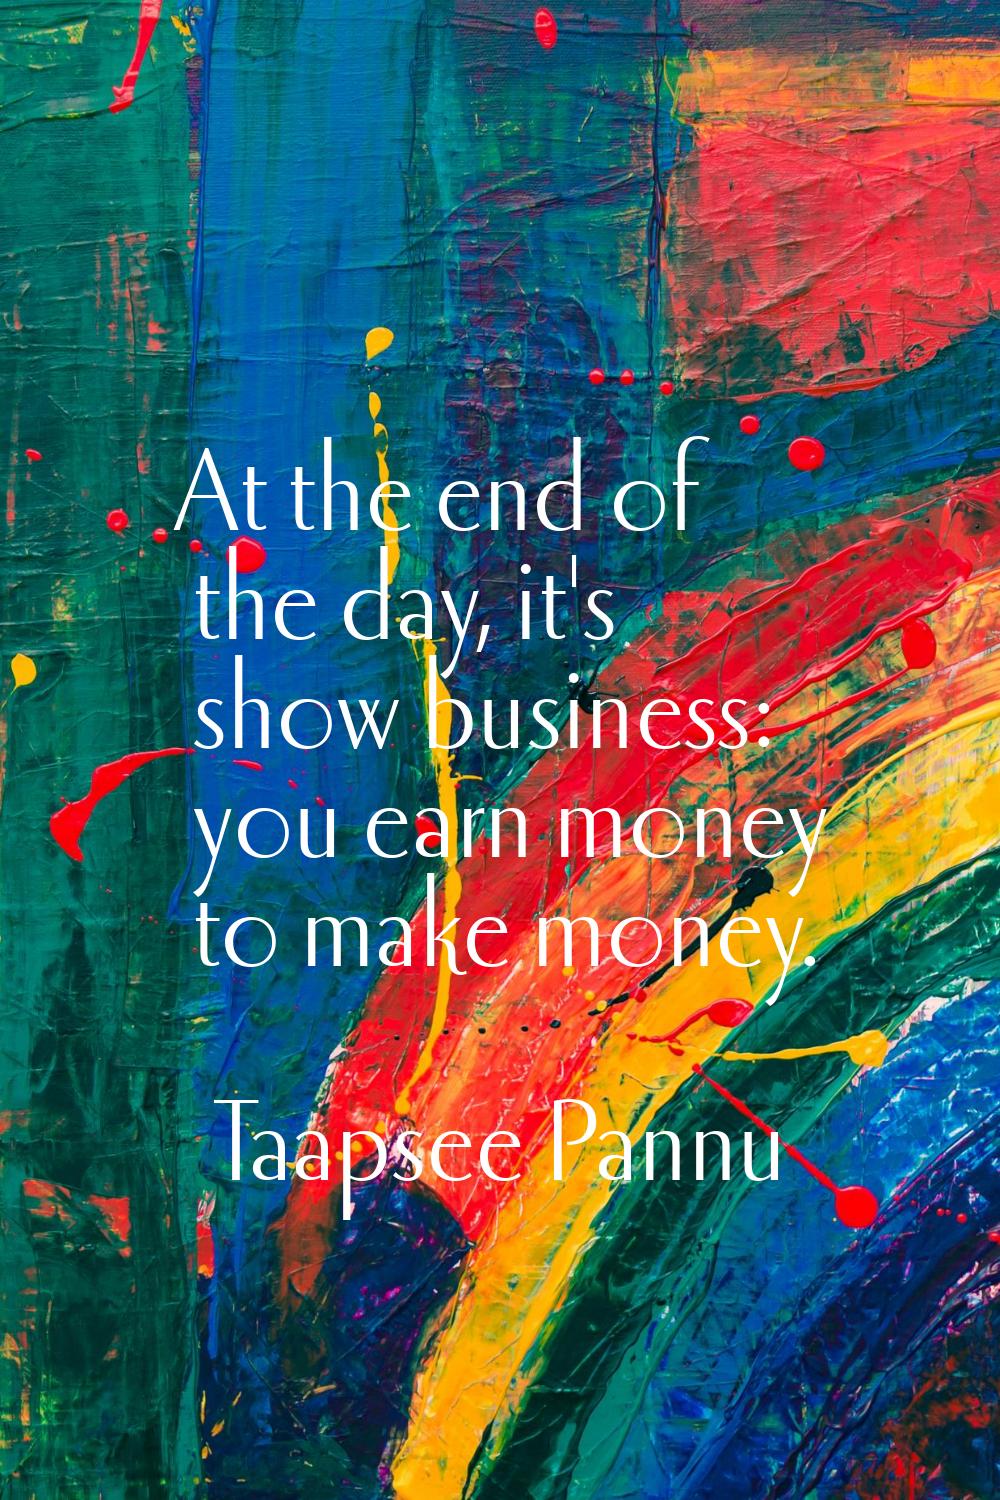 At the end of the day, it's show business: you earn money to make money.